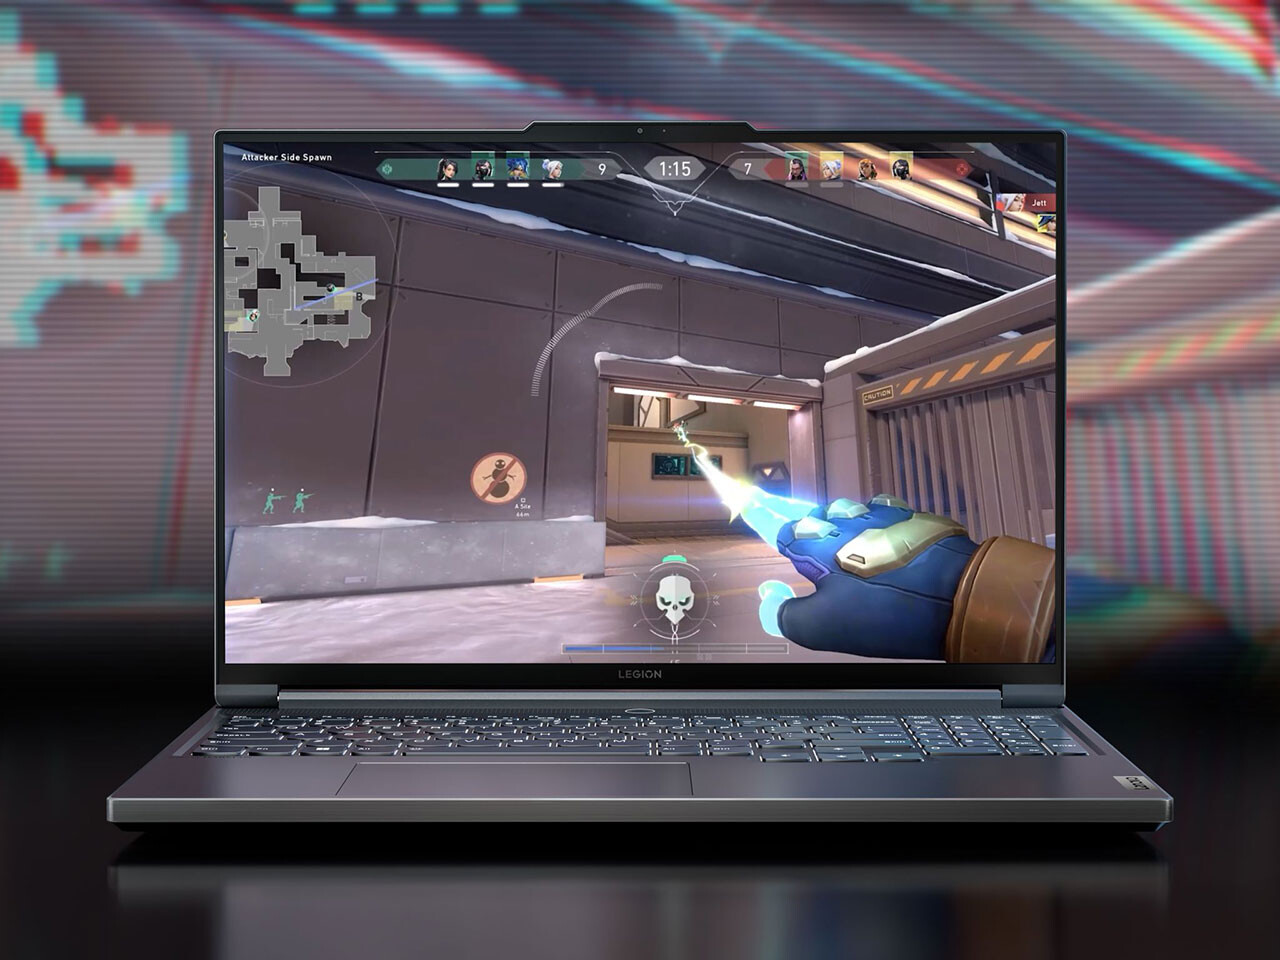 Lenovo Combines Stealth with Apex Performance in the Latest Legion 7 Series Gaming Laptops -